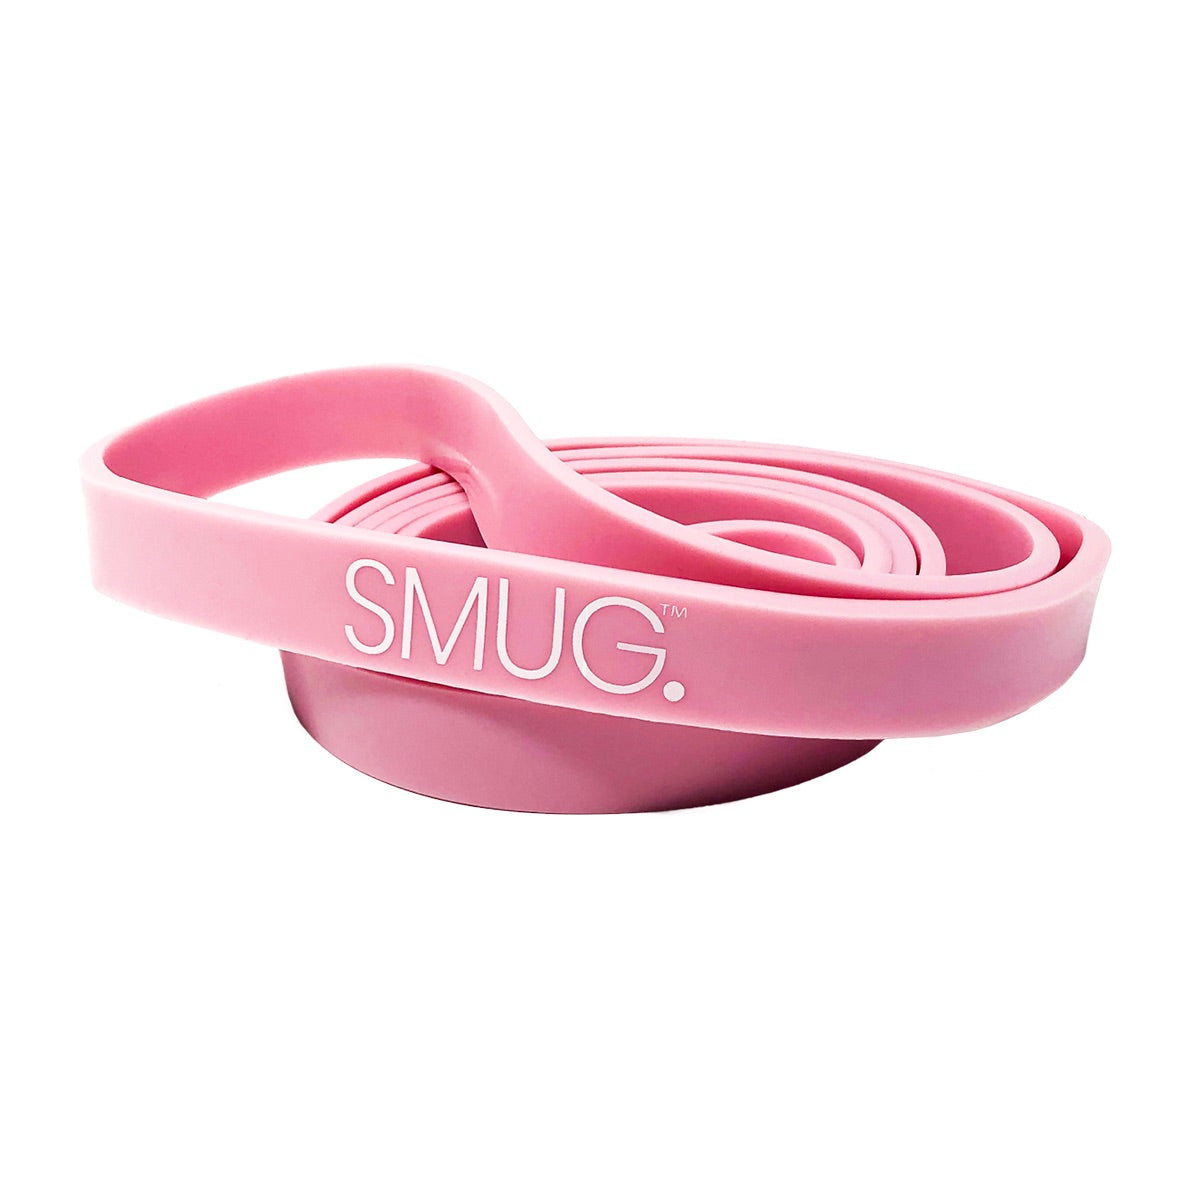  SMUG Breast Support Band For Women, Compression Band Prevent  Breast Bounce, Pain & Injury, Adjustable Breast Support Band, Sports Bra  Alternative for Running & Exercise